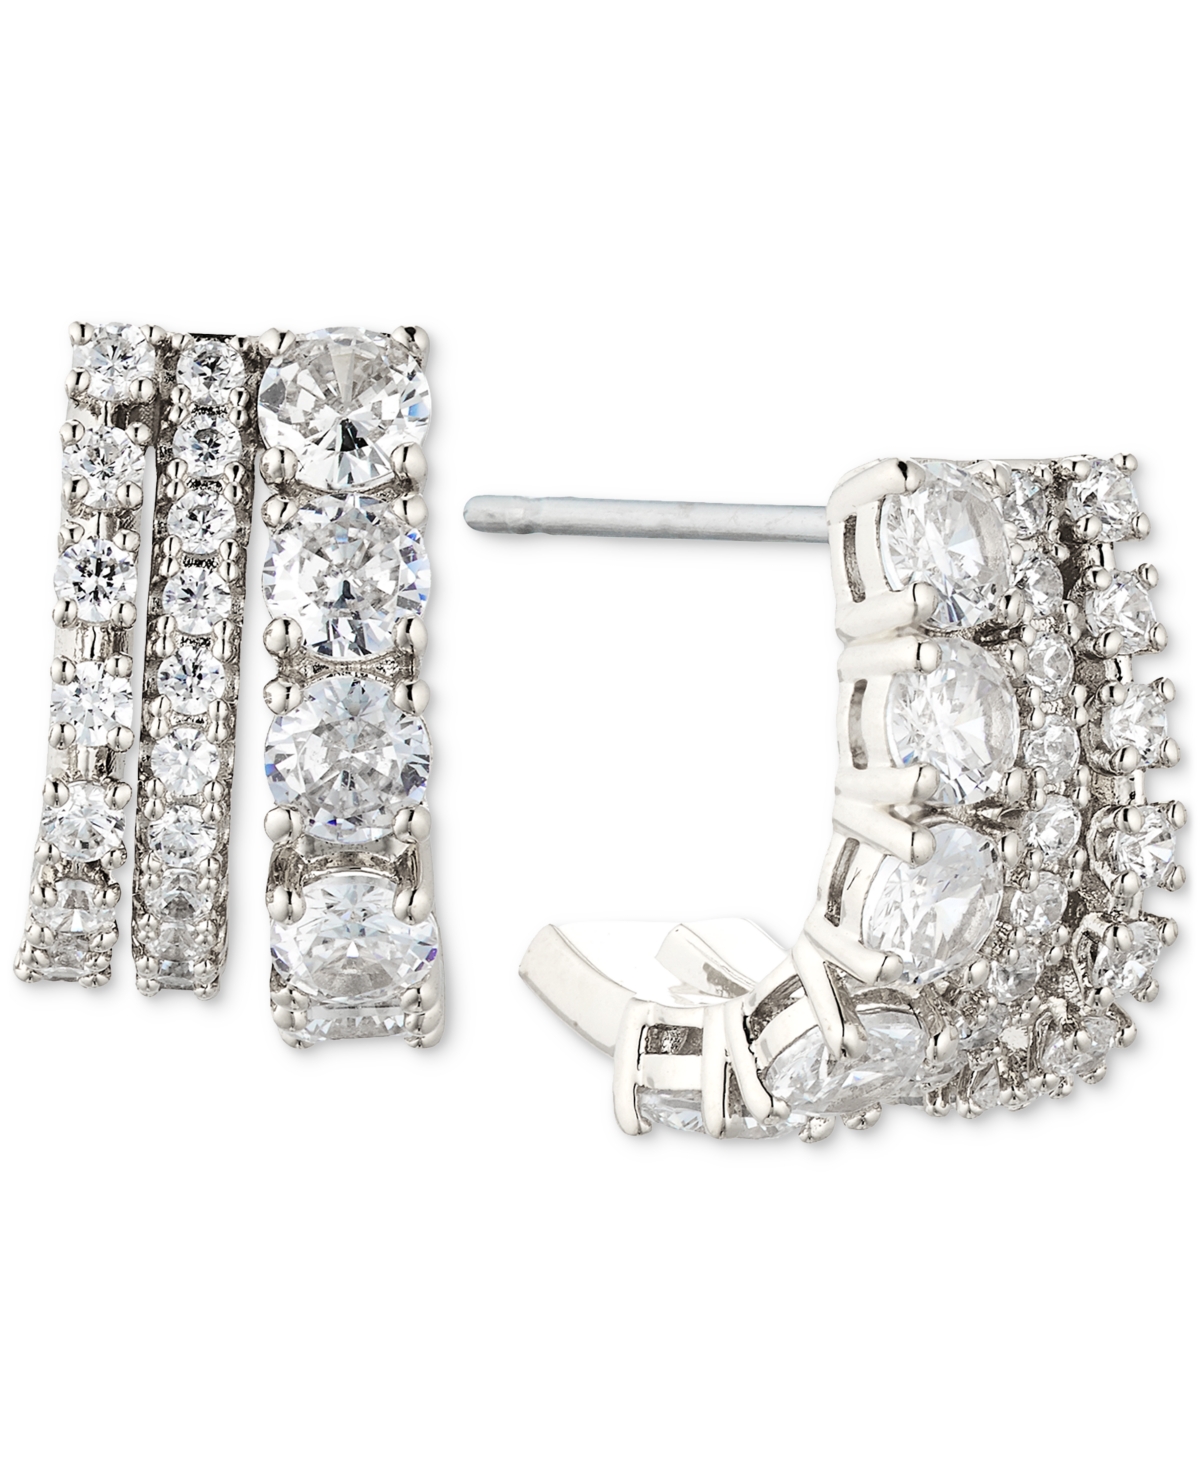 Silver-Tone Cubic Zirconia Small J-Hoop Earrings, Created for Macy's - Silver